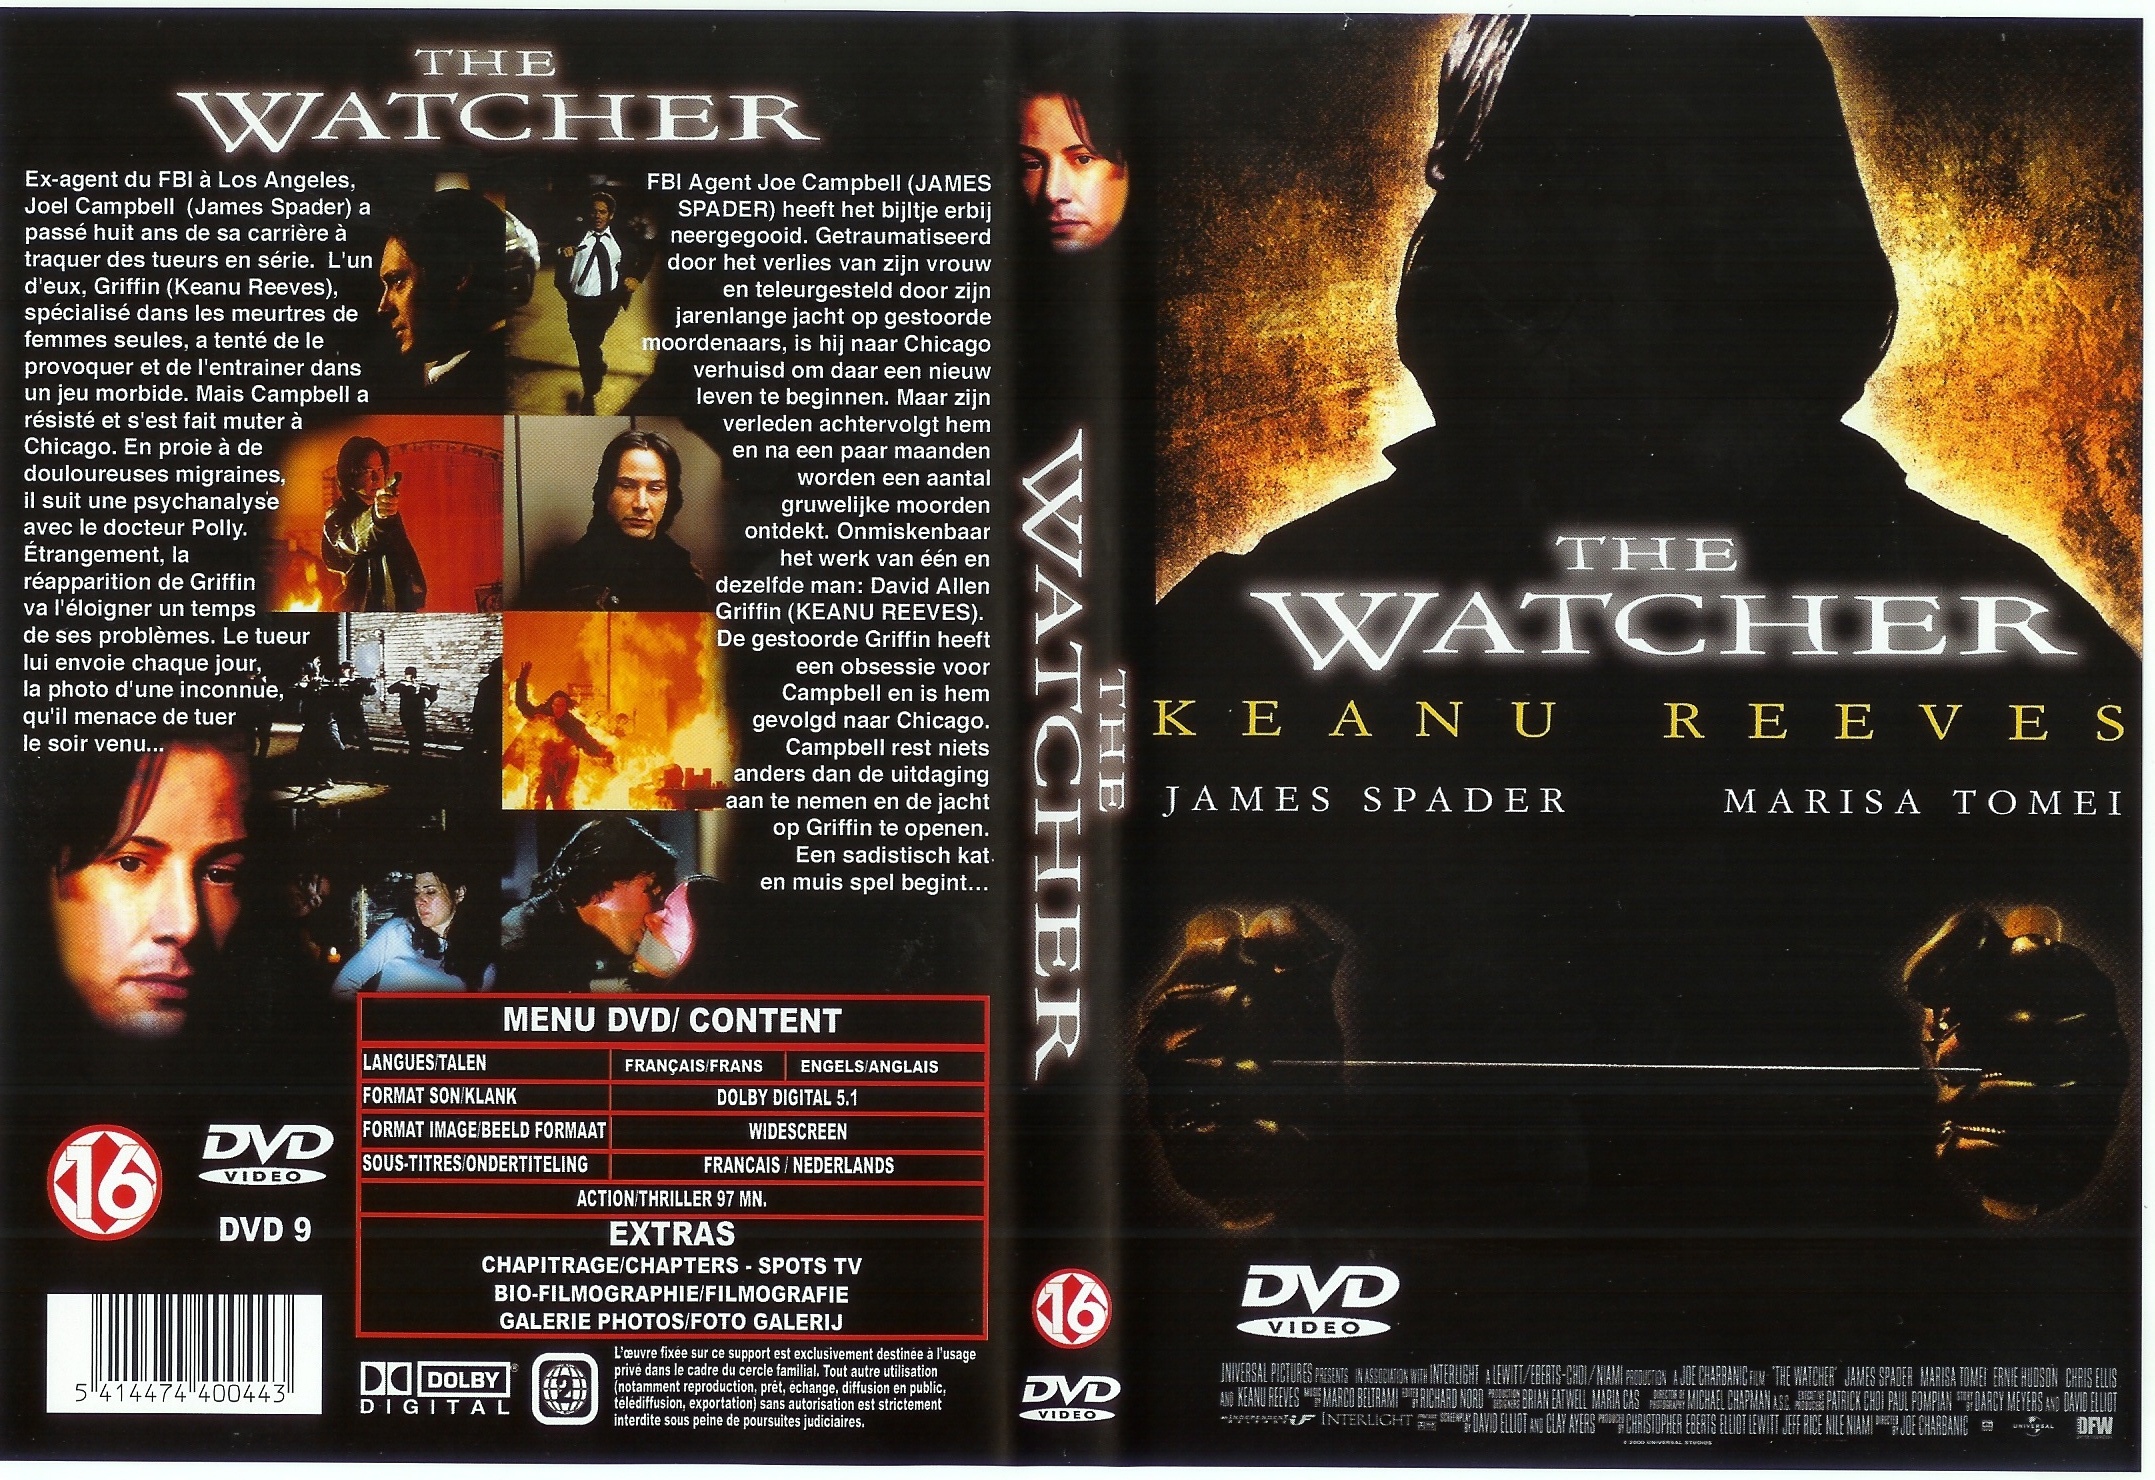 Jaquette DVD The watcher v3